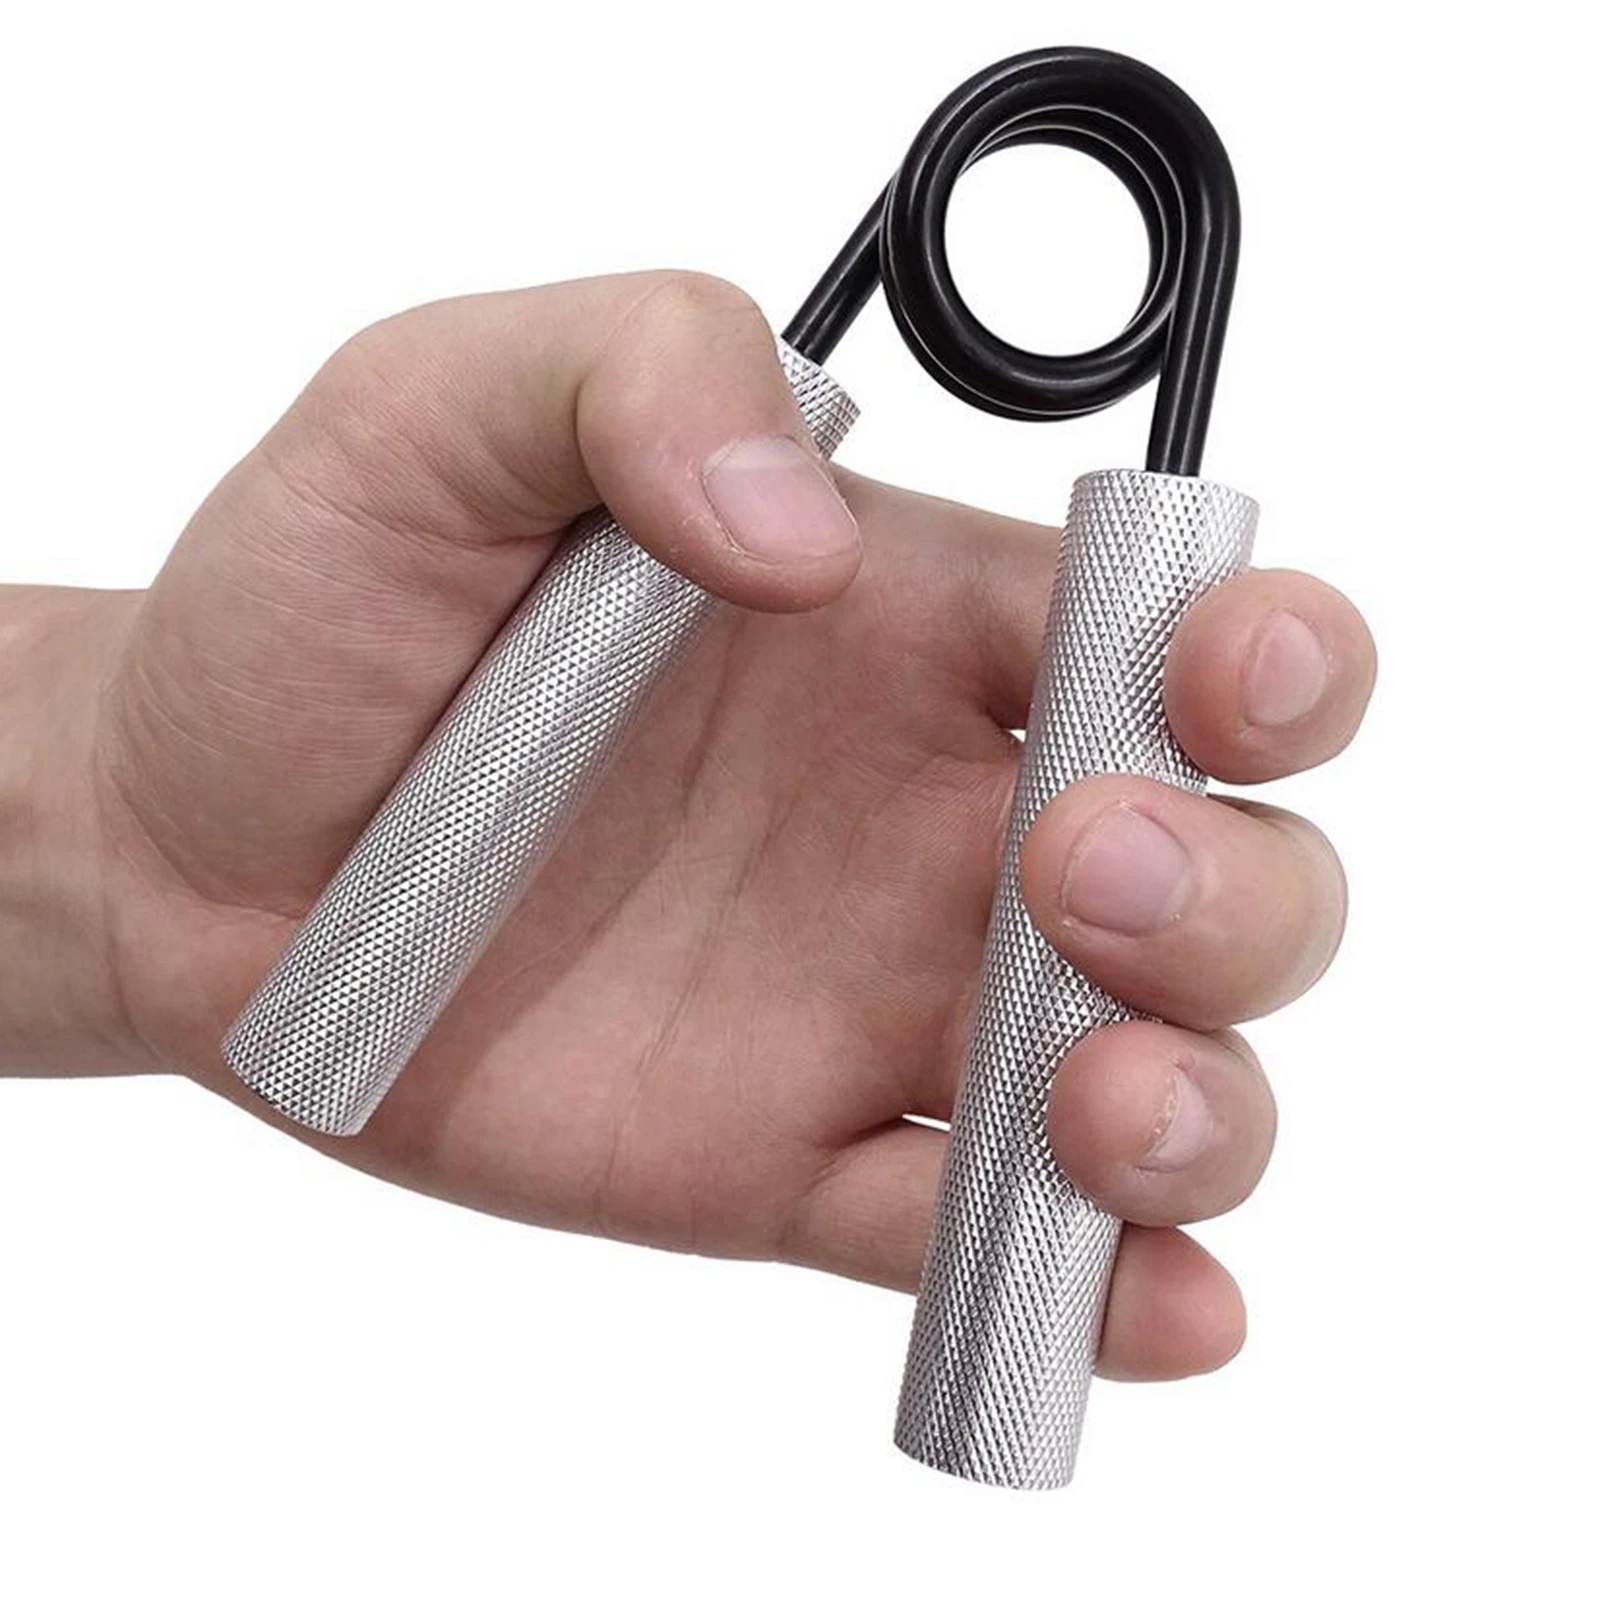 100lbs-350lbs Fitness Heavy Grips Wrist Hand Gripper Muscle Strength Training Device Carpal Expander